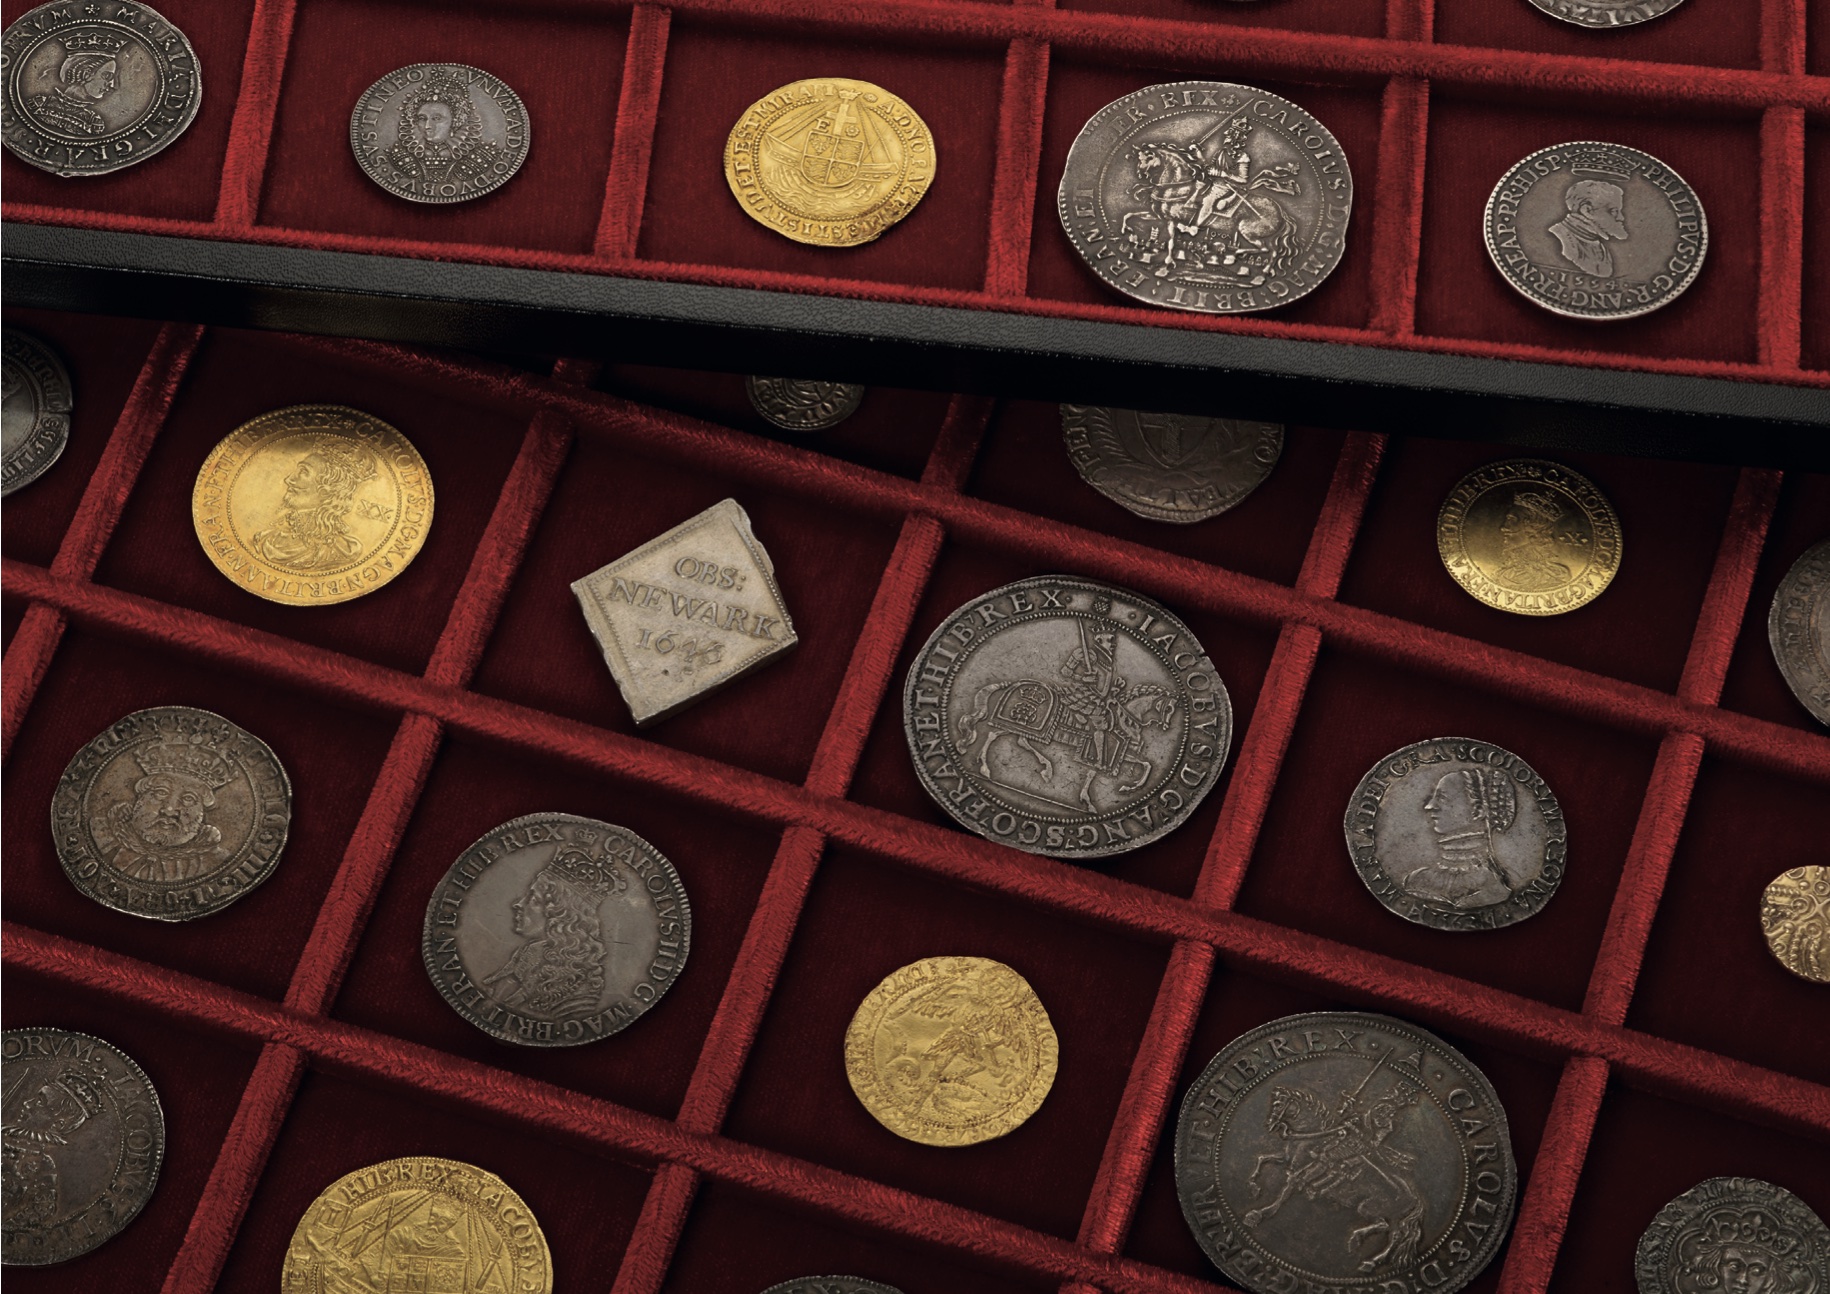 A collection of antique coins